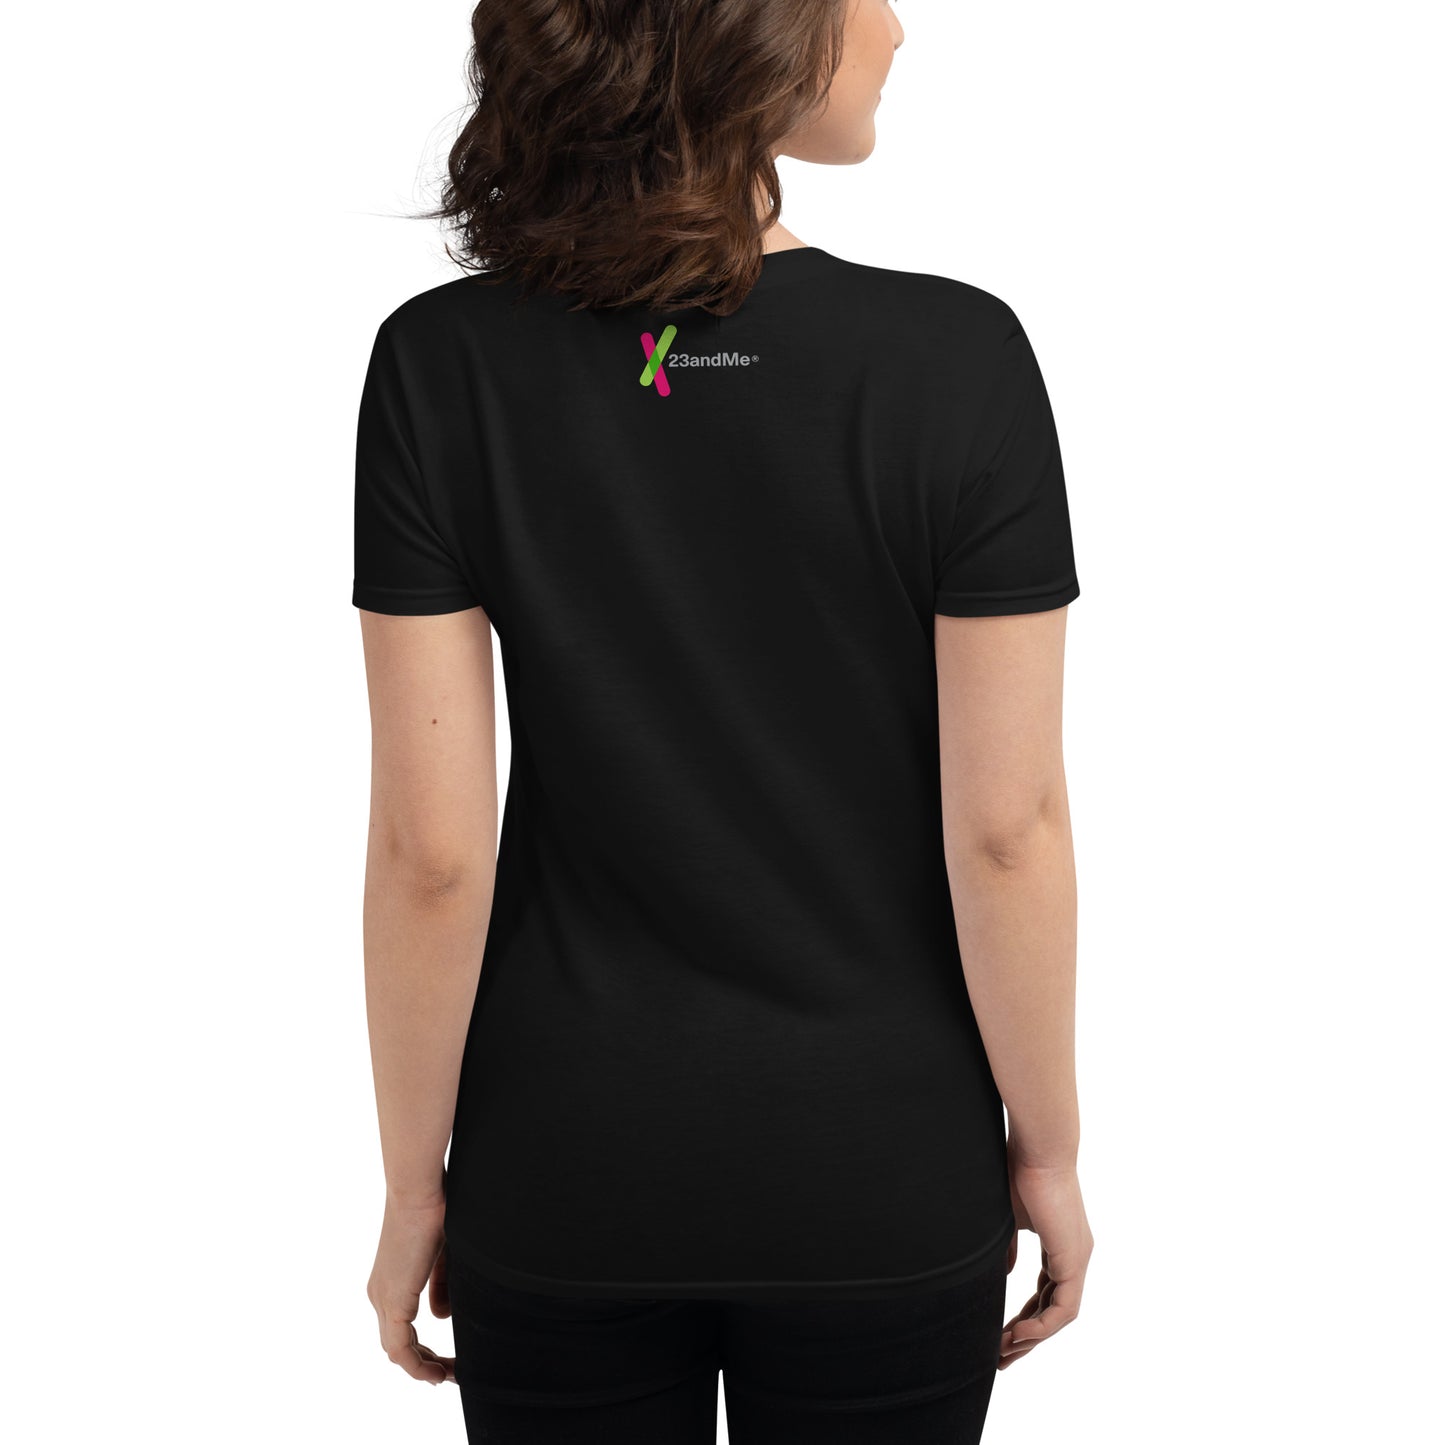 Women's Lead with Science T-Shirt